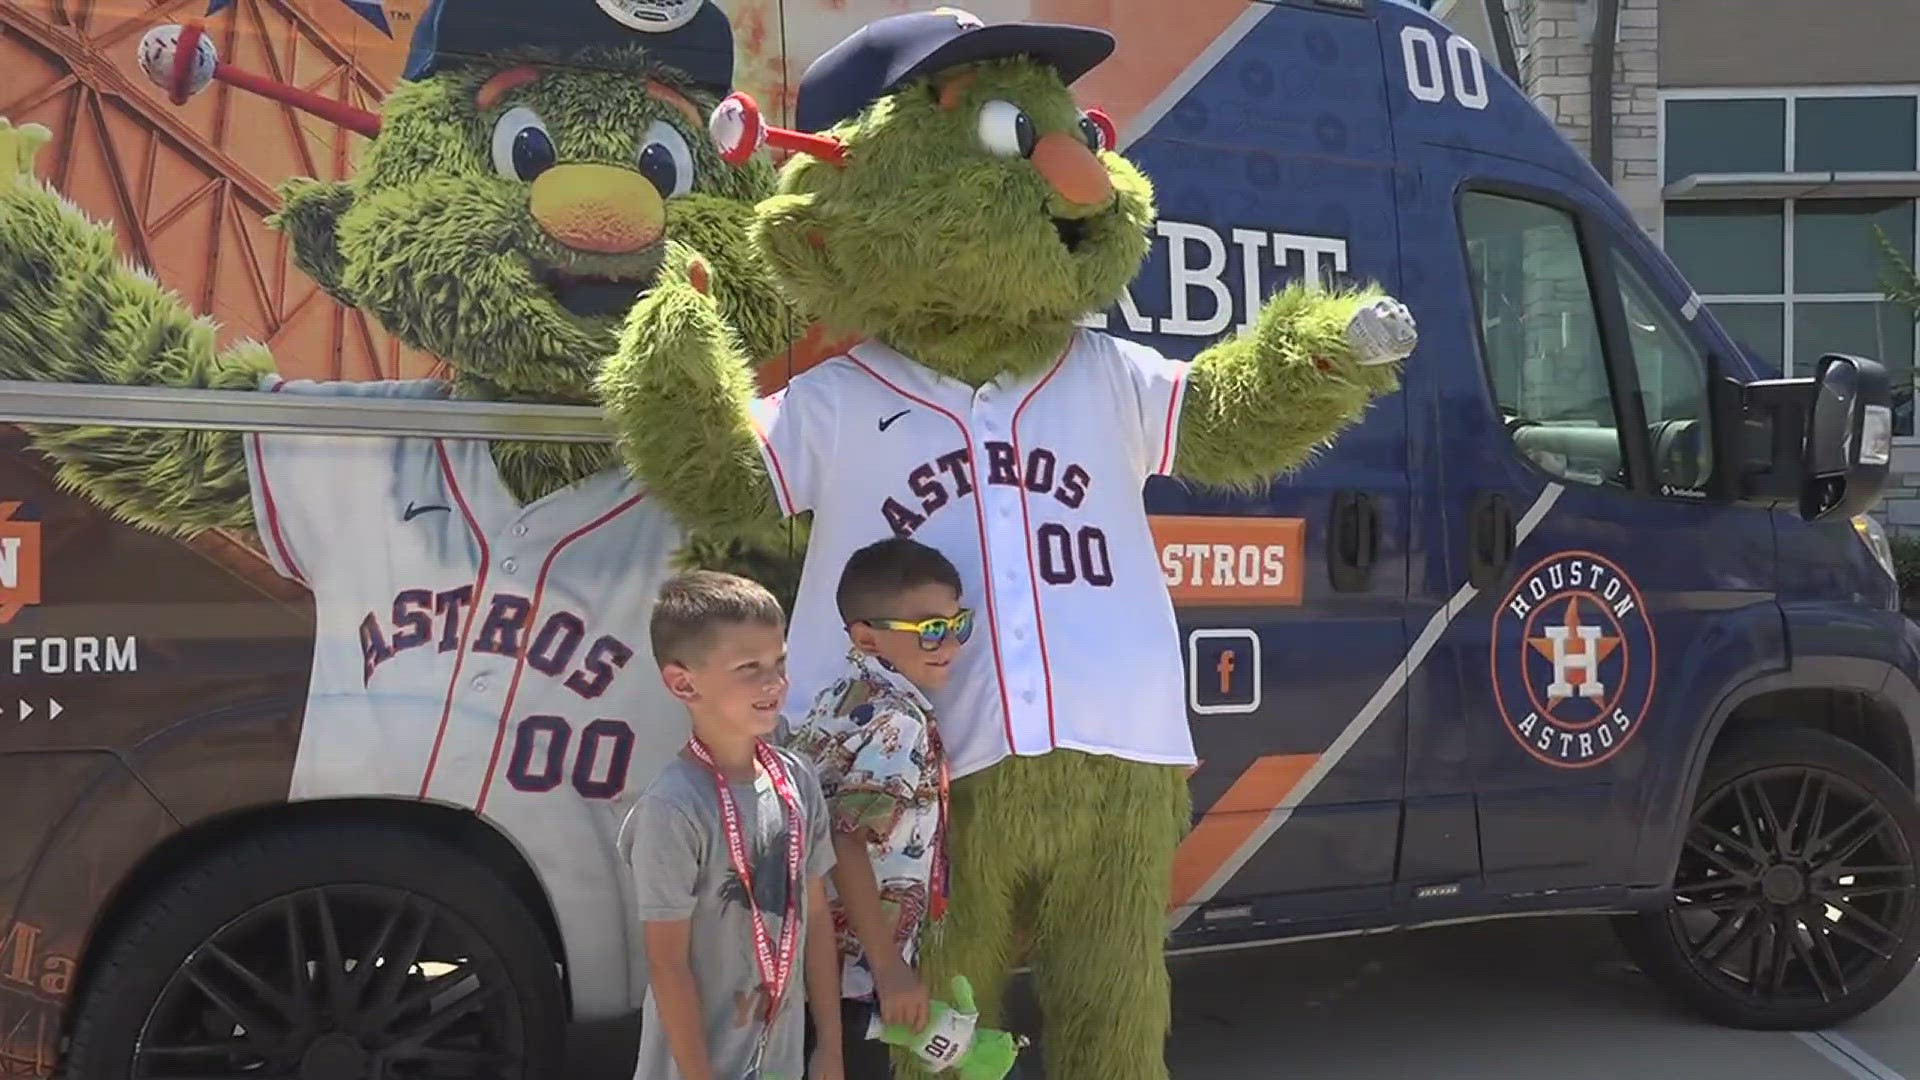 All you kids (and adults too) check - Houston Astros Orbit